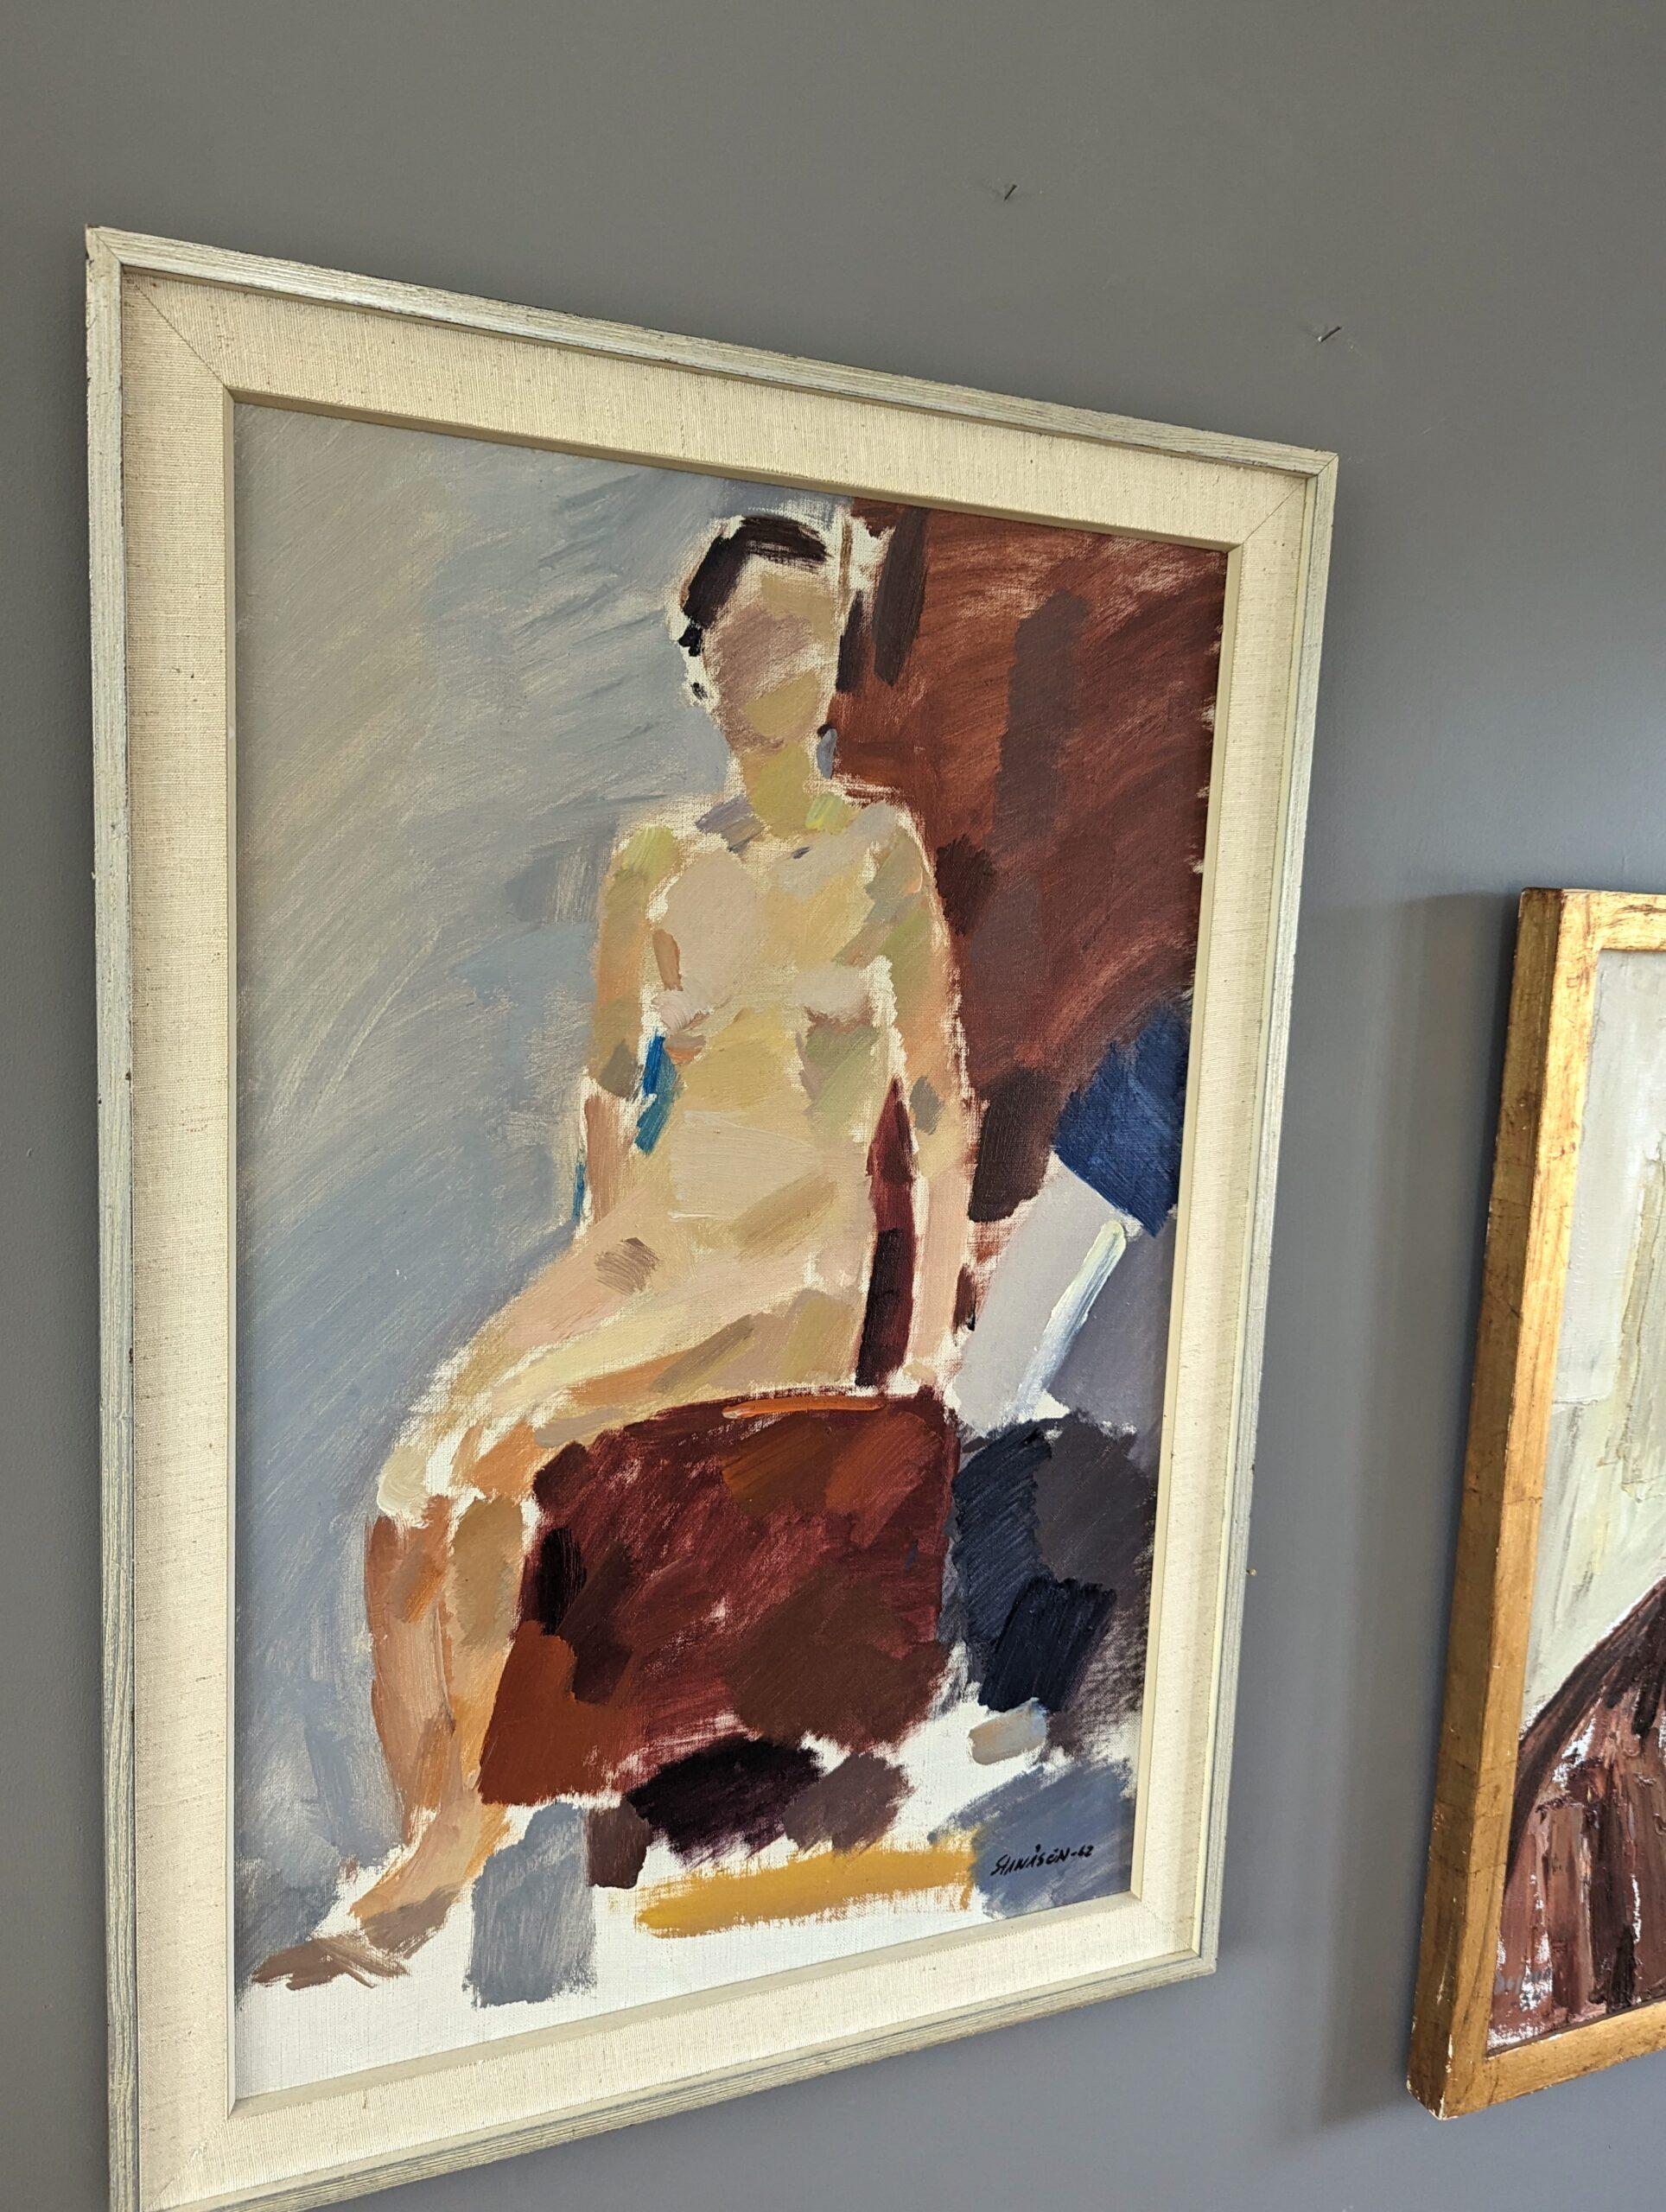 1962 Vintage Mid-Century Modern Nude Portrait Oil Painting - On the Red Chair For Sale 1